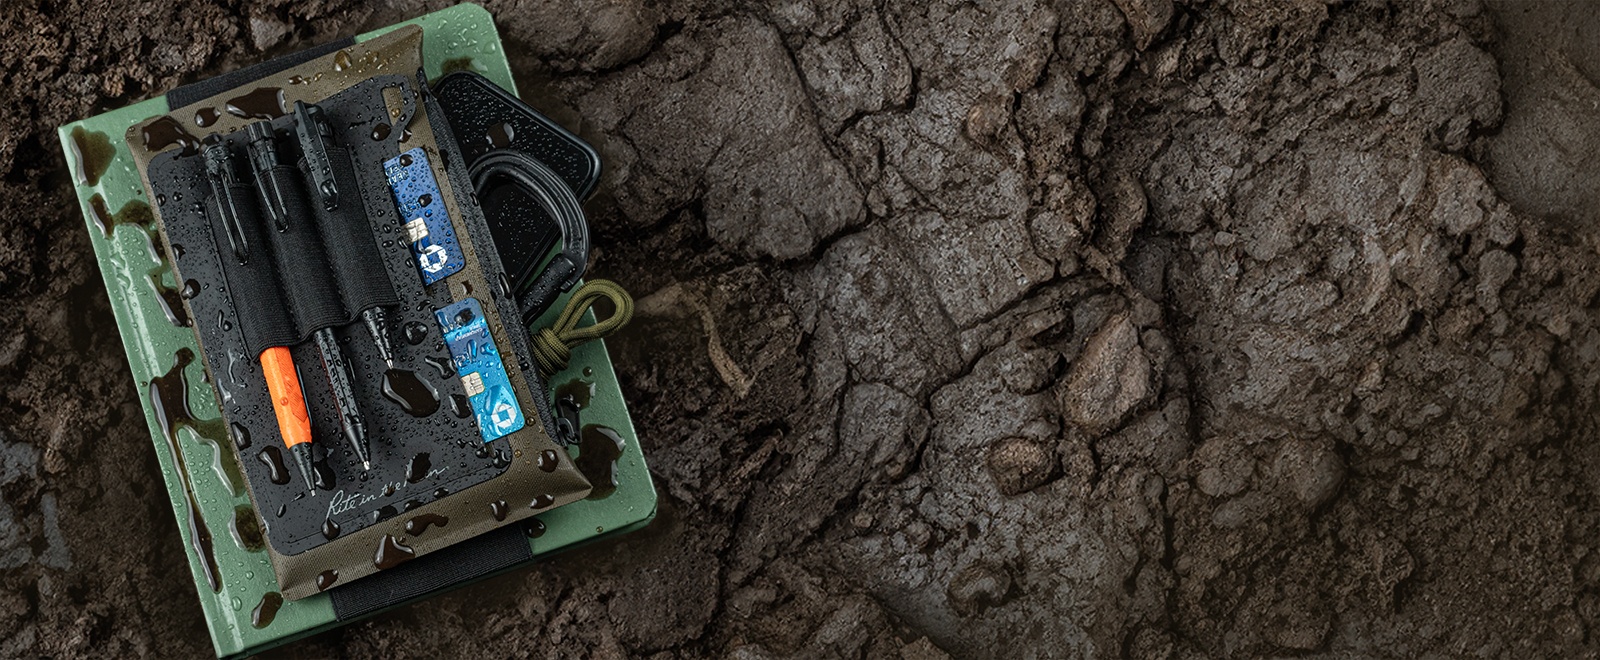 Open Pocket pouch with a notebook that says protect and organize your essential field tools.